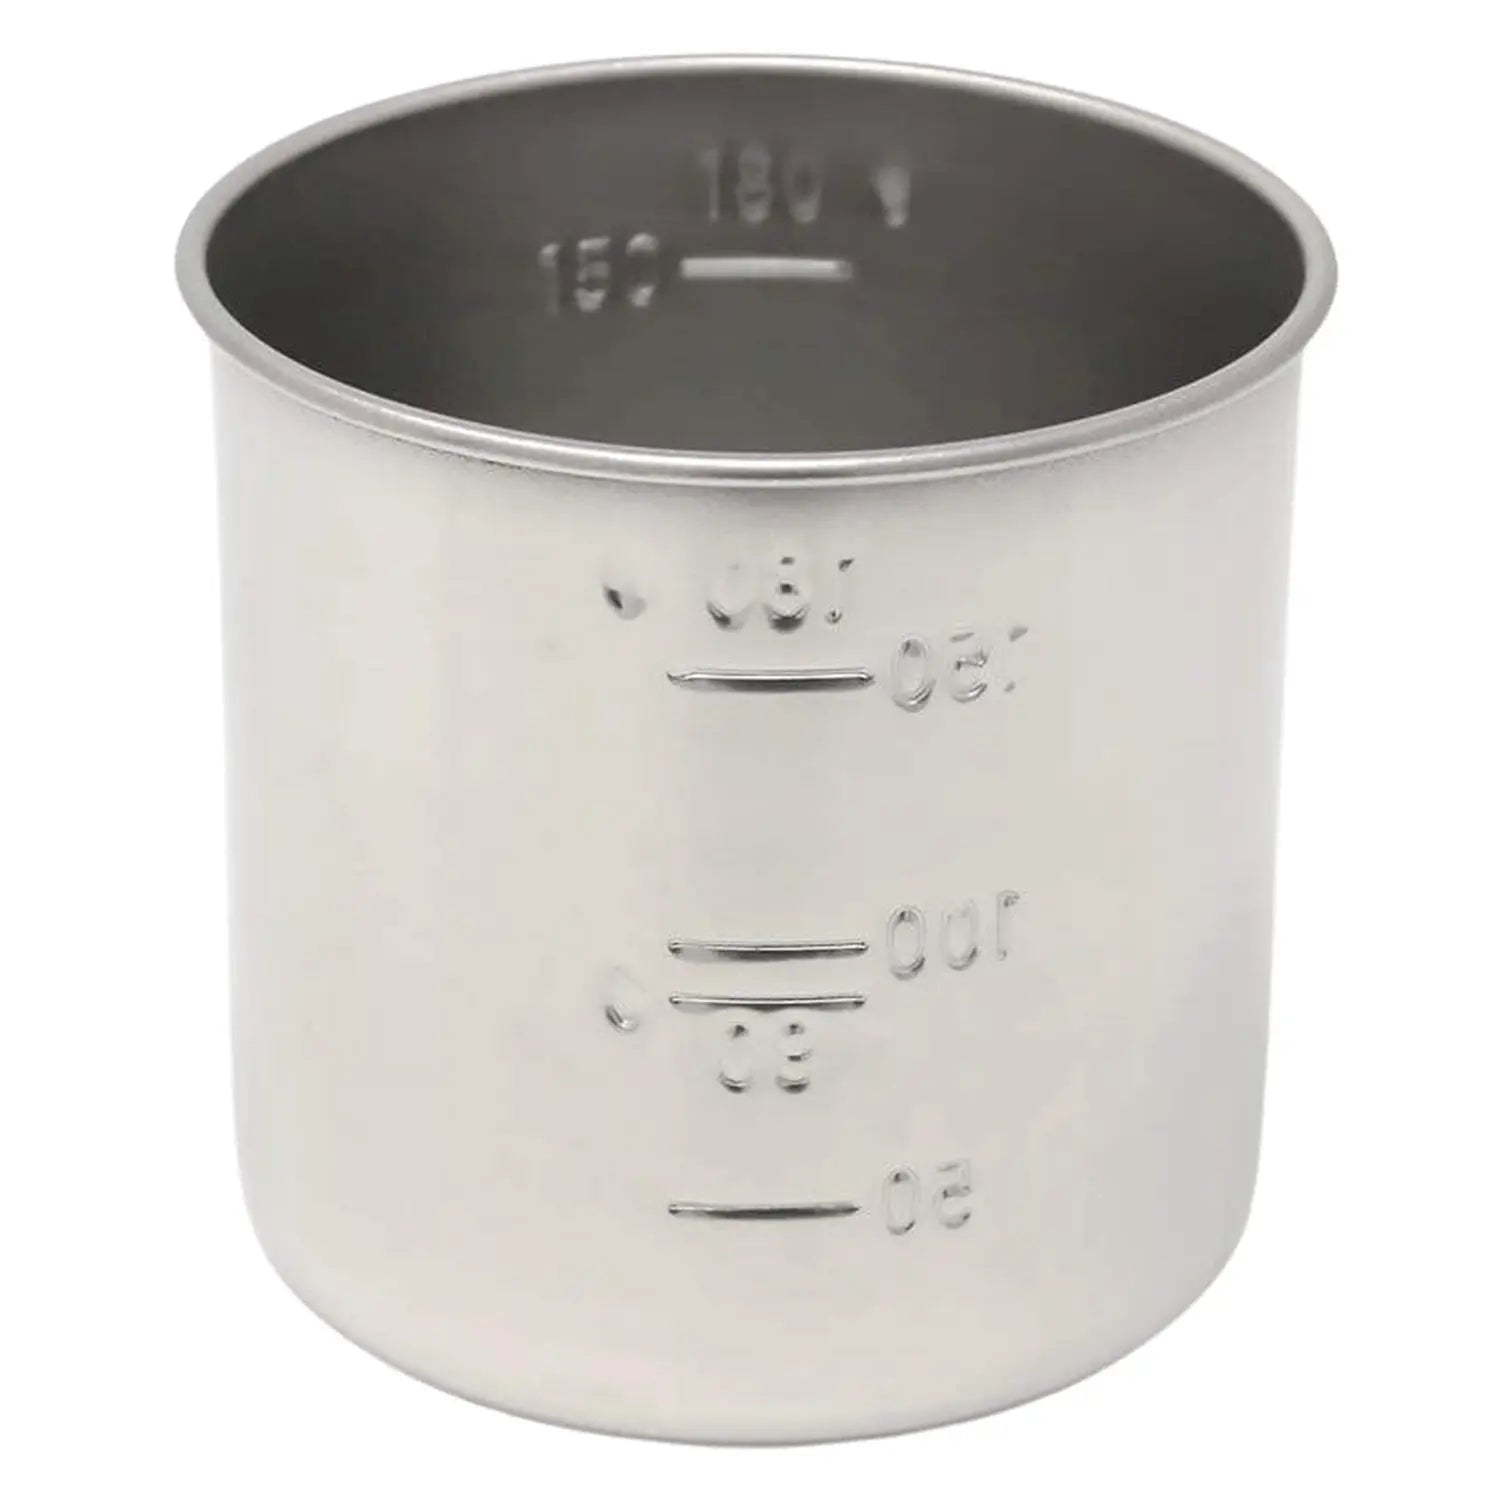 Rice Cooker – Tagged Lid– HARIO PARTS SHOP